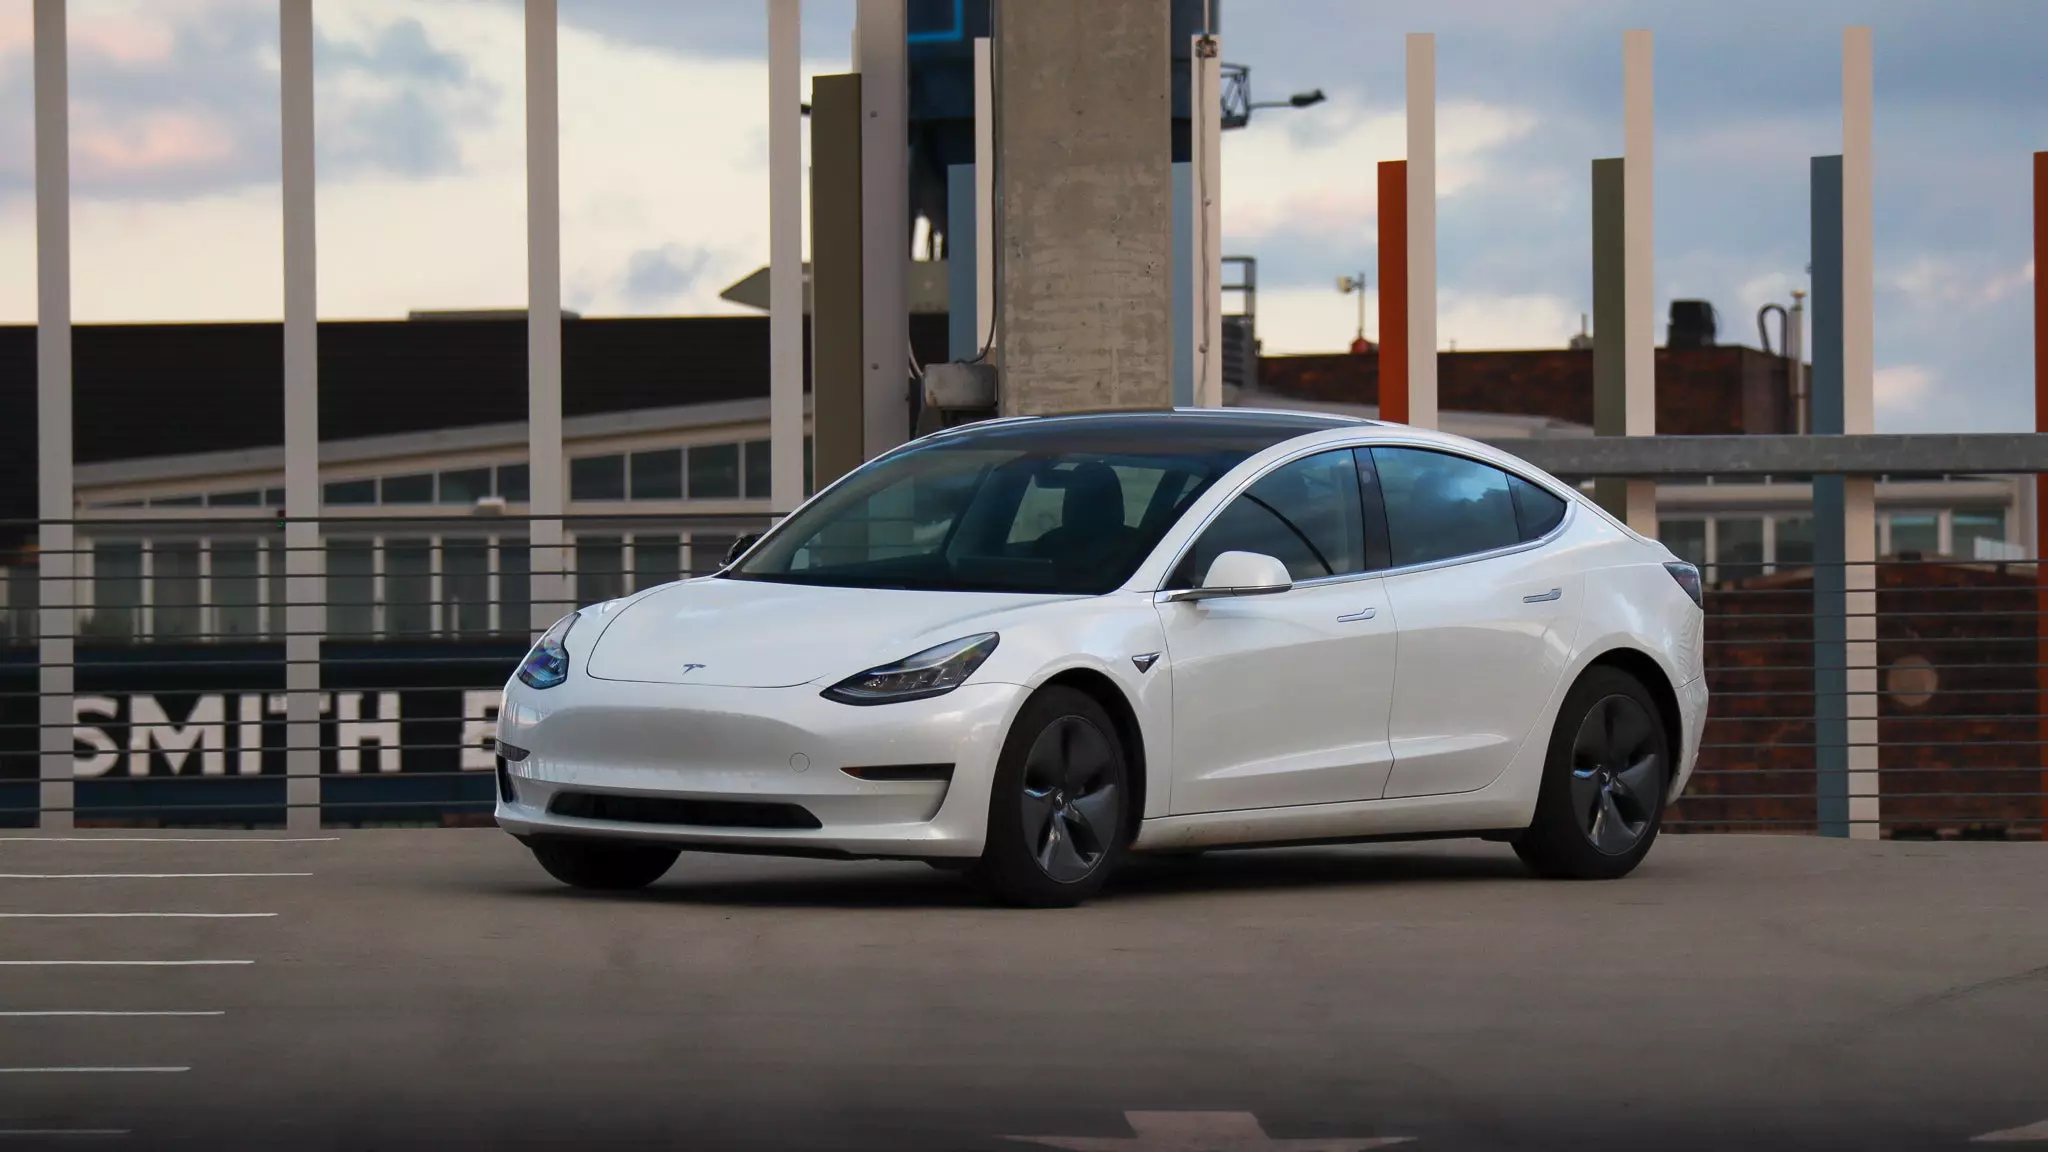 Tesla Model 3: A Cross Between a BMW and an iPad in the Best and Worst Ways